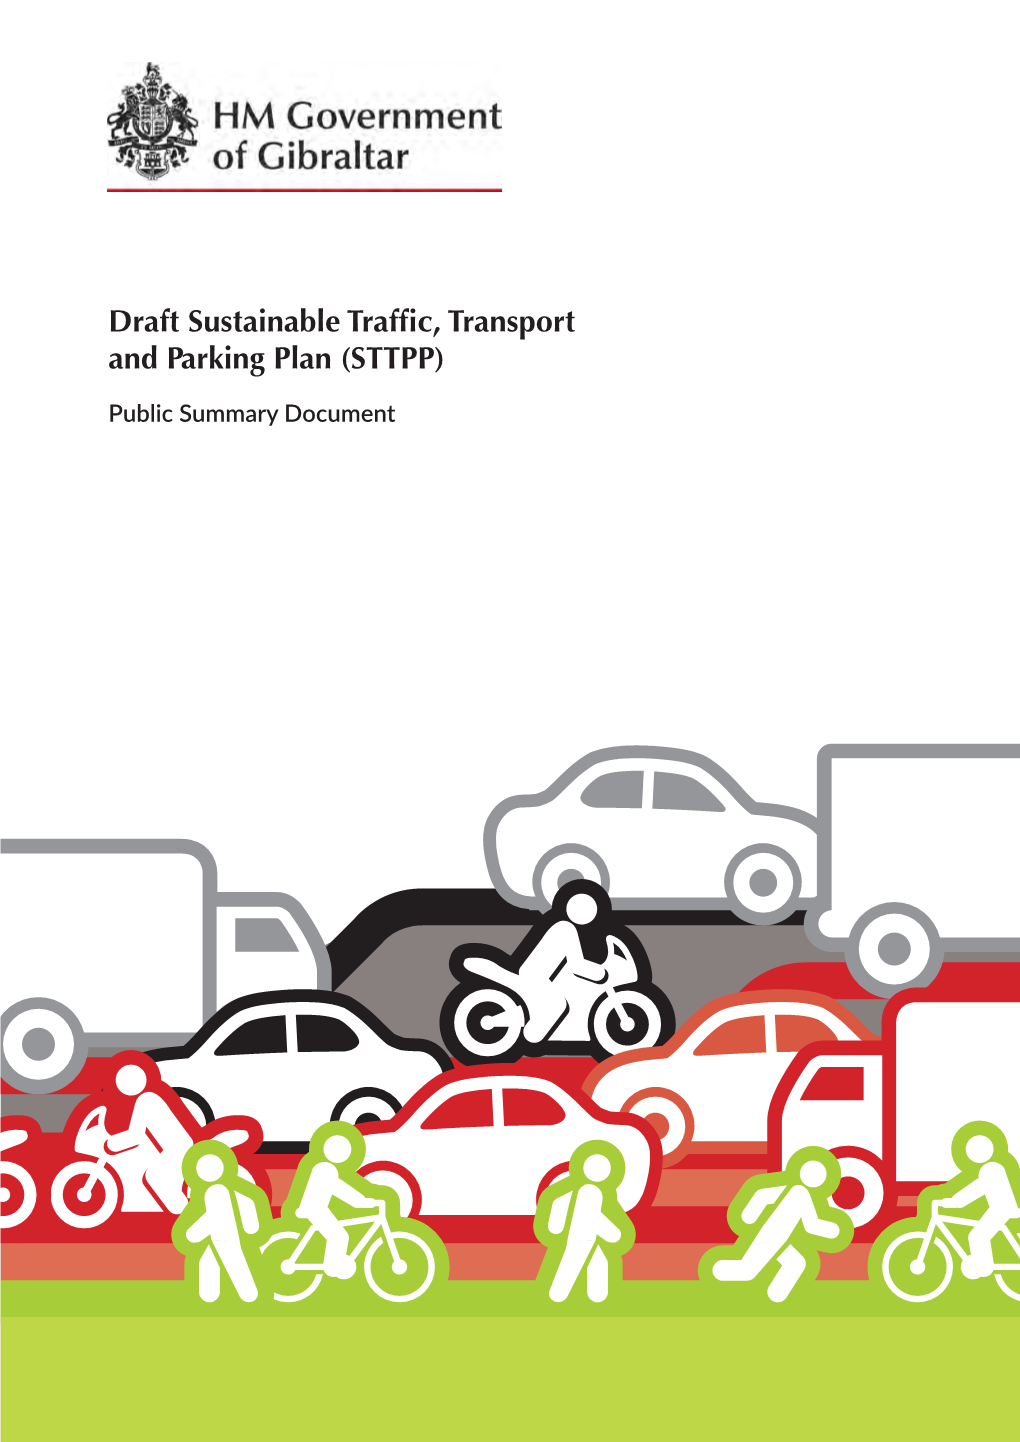 Draft Sustainable Traffic, Transport and Parking Plan (STTPP)